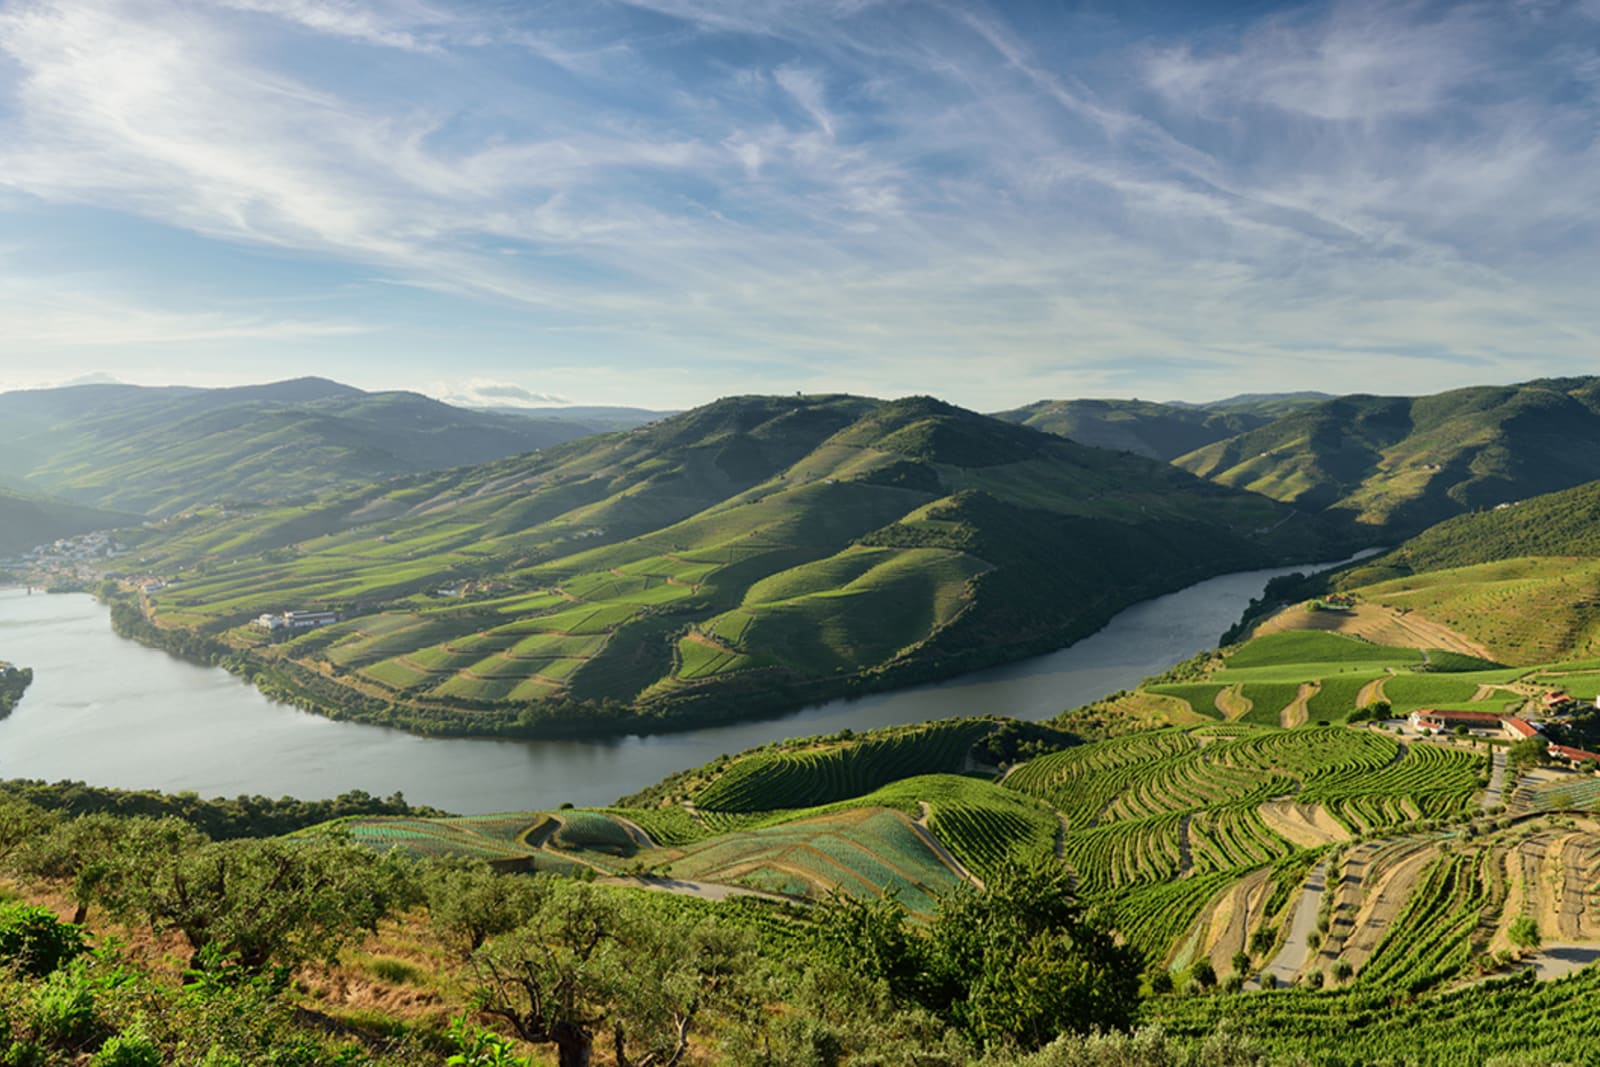 The Douro River Valley is home to some of Portugal's top wineries